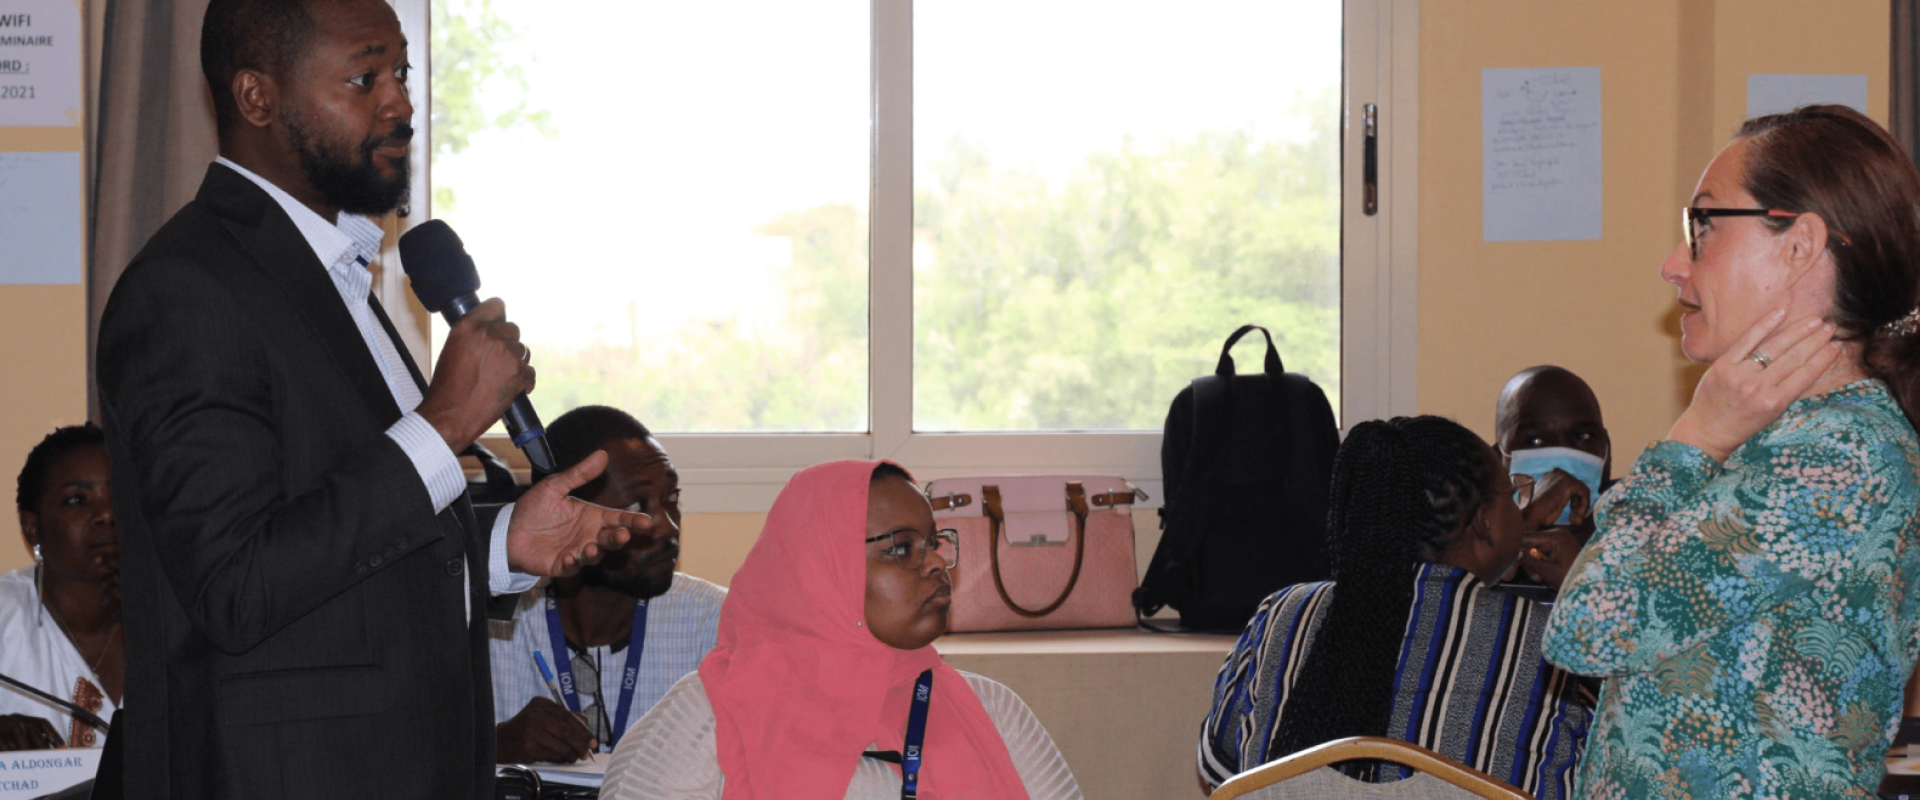 Participant intervention during the workshop. Photo credit: IOM / Abdoulaye SOUKOUNA